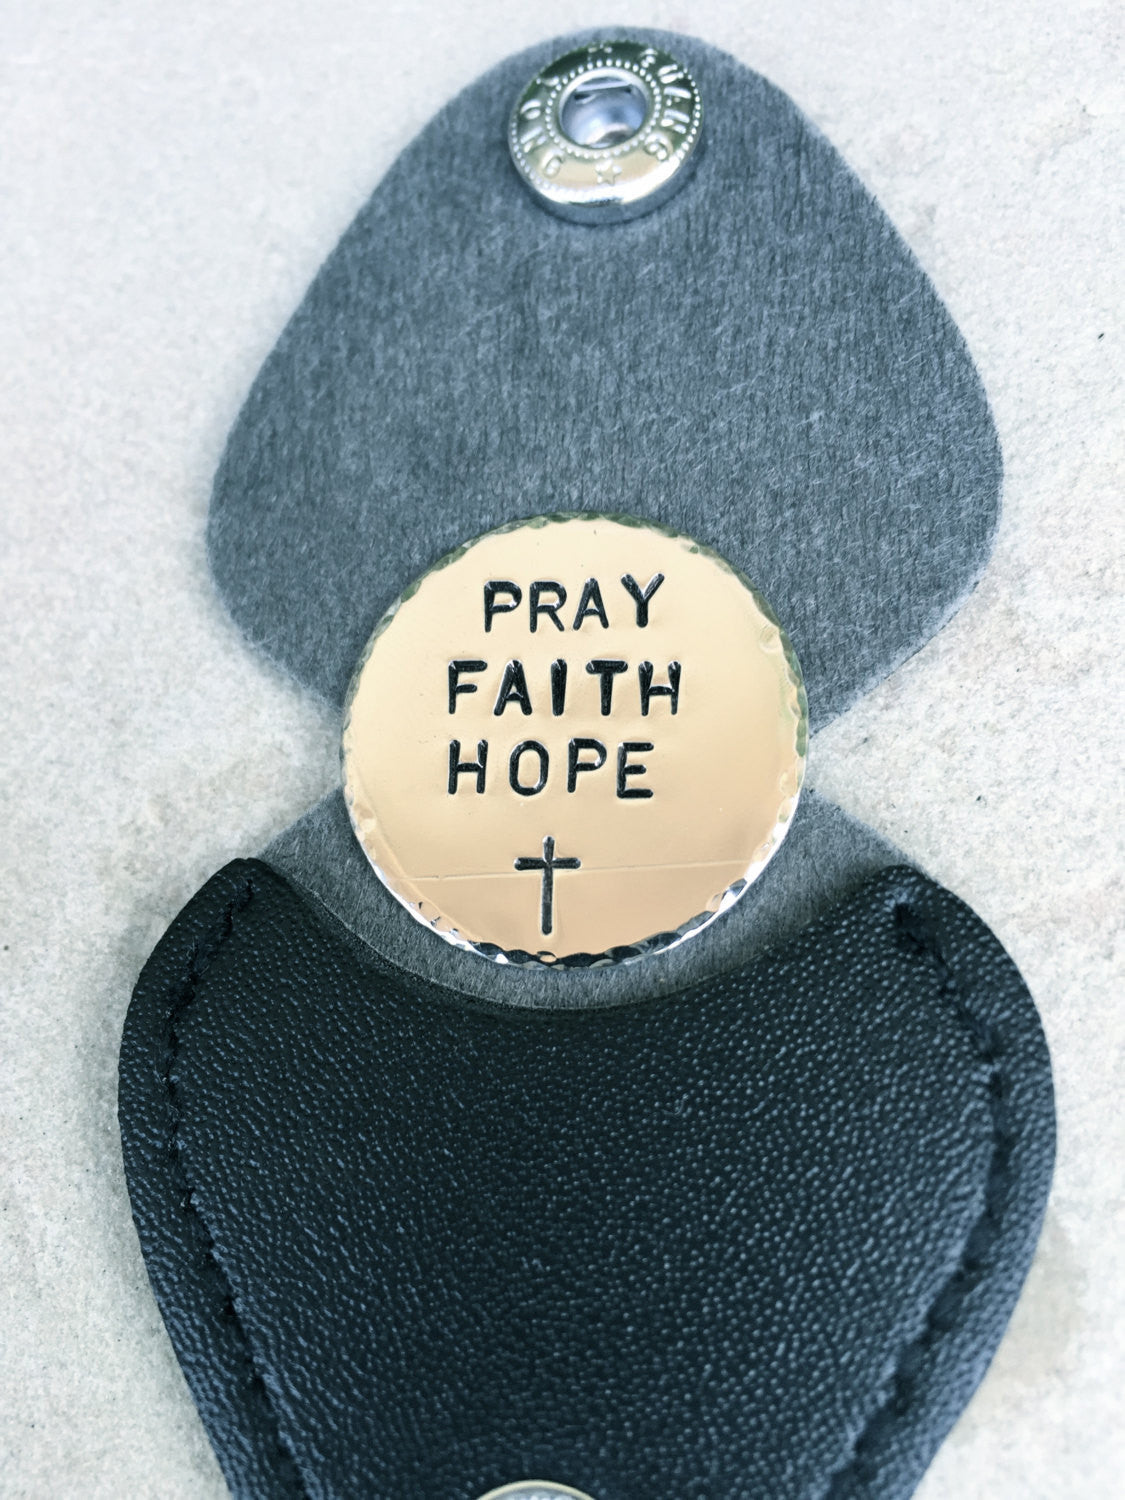 Personalized Prayer Keepsake, Be Safe And Come Home - Natashaaloha, jewelry, bracelets, necklace, keychains, fishing lures, gifts for men, charms, personalized, 